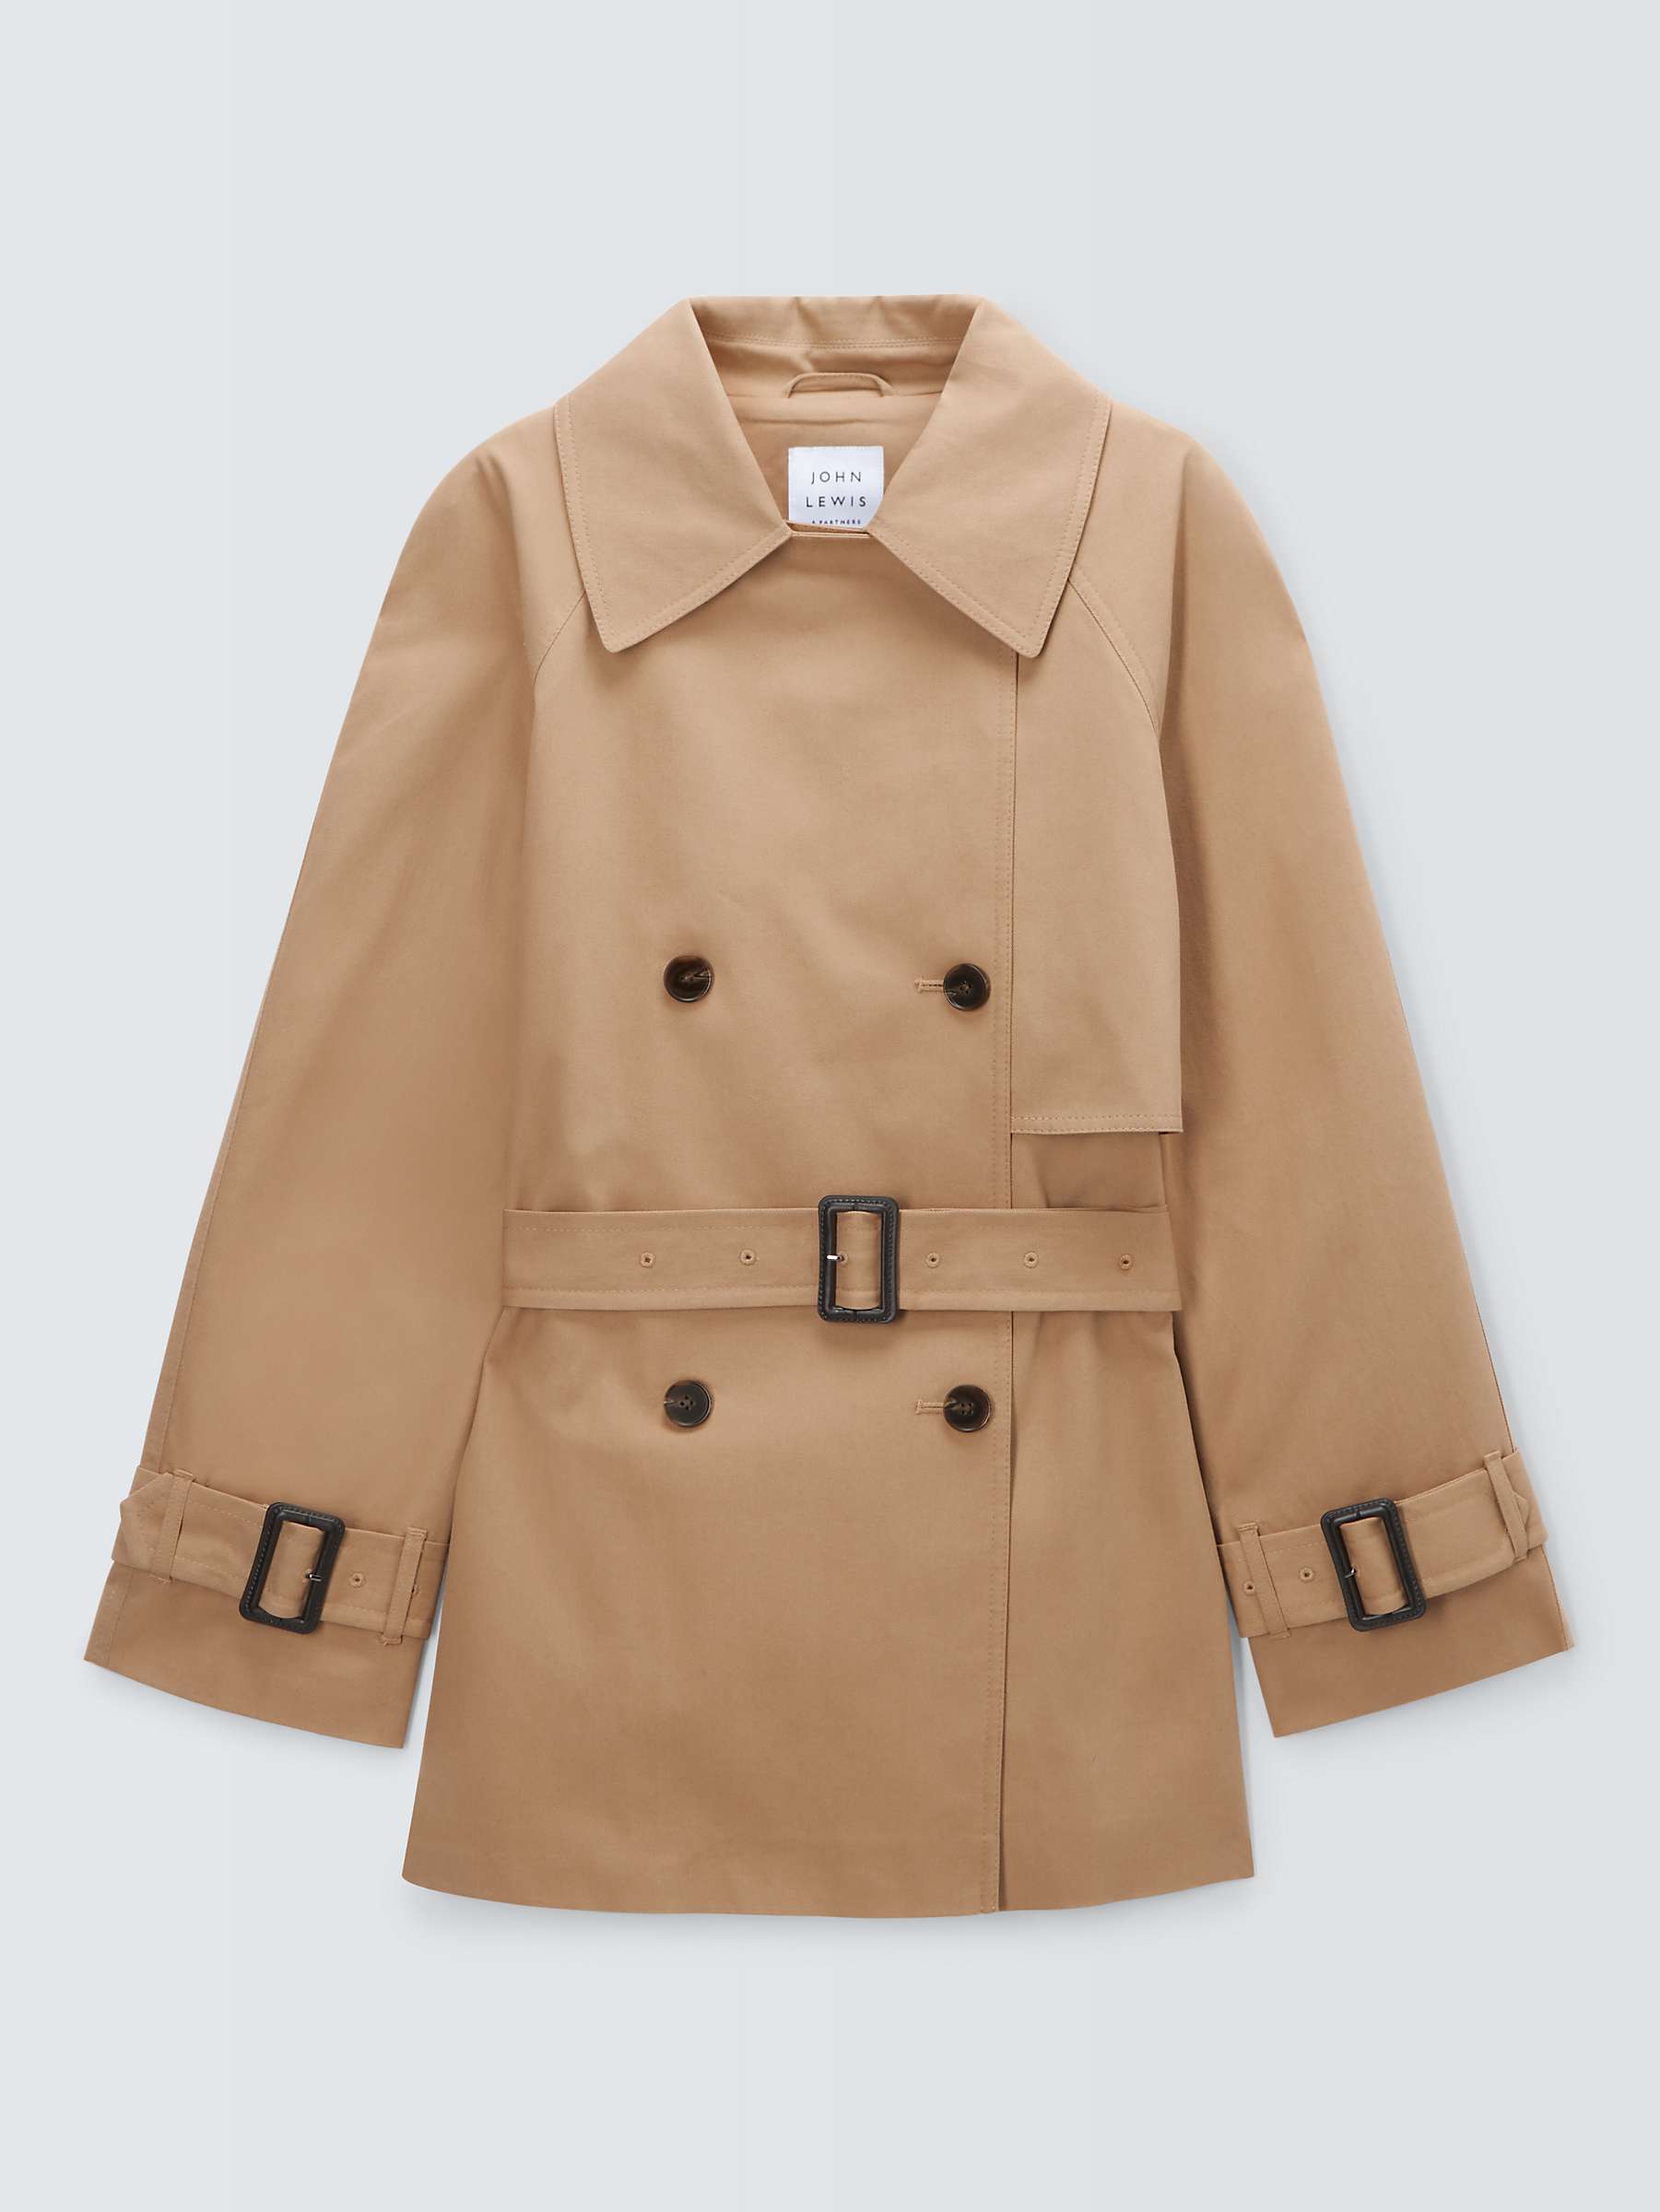 Buy John Lewis Short Contemporary Trench Coat, Stone Online at johnlewis.com